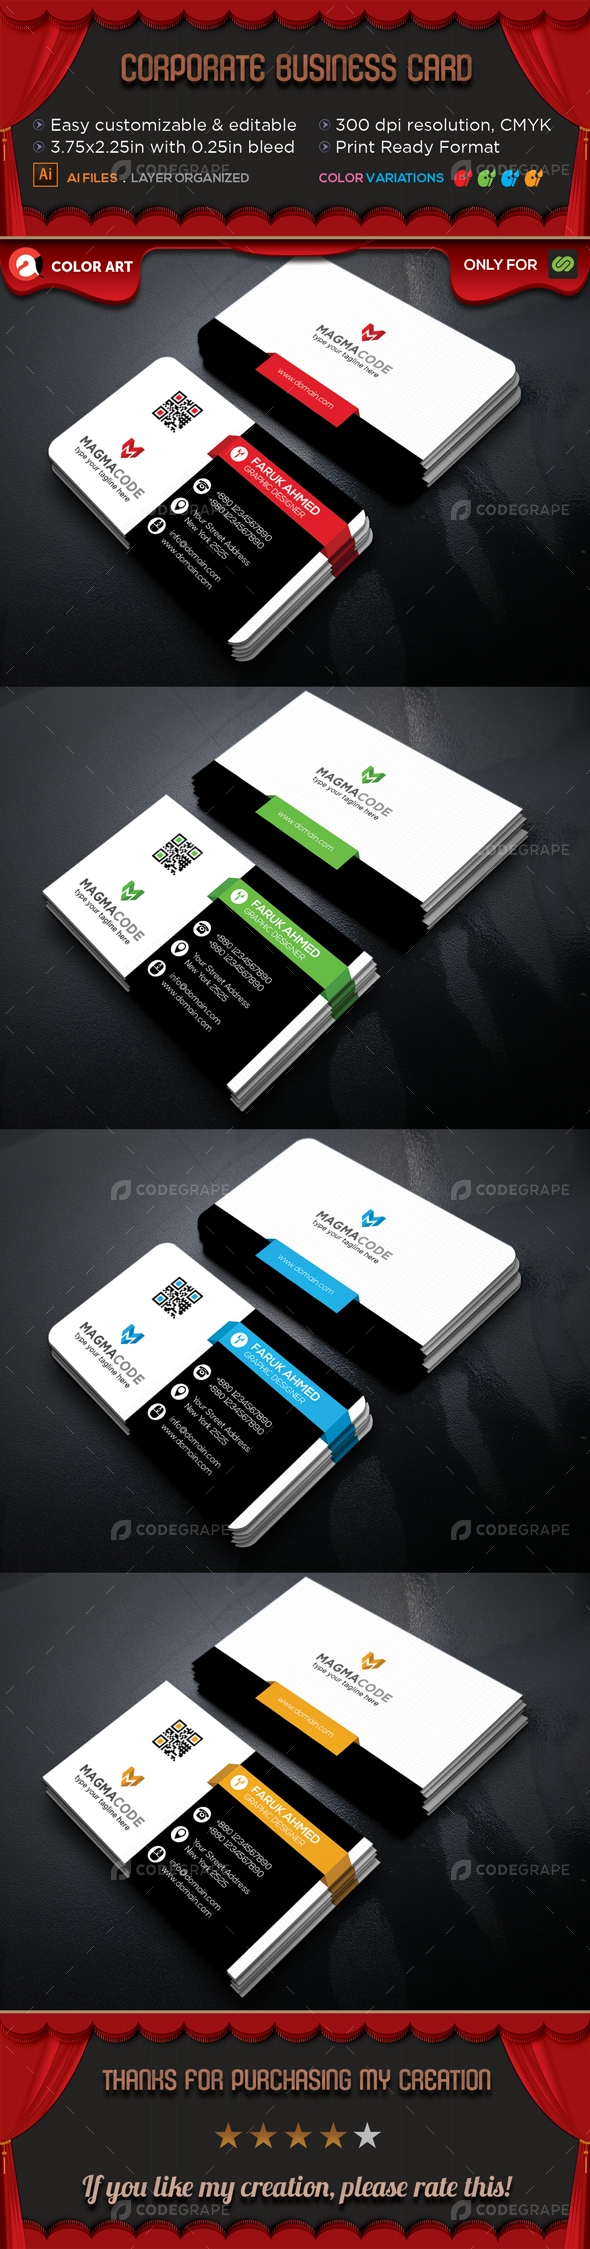 Corporate Business Card V.10